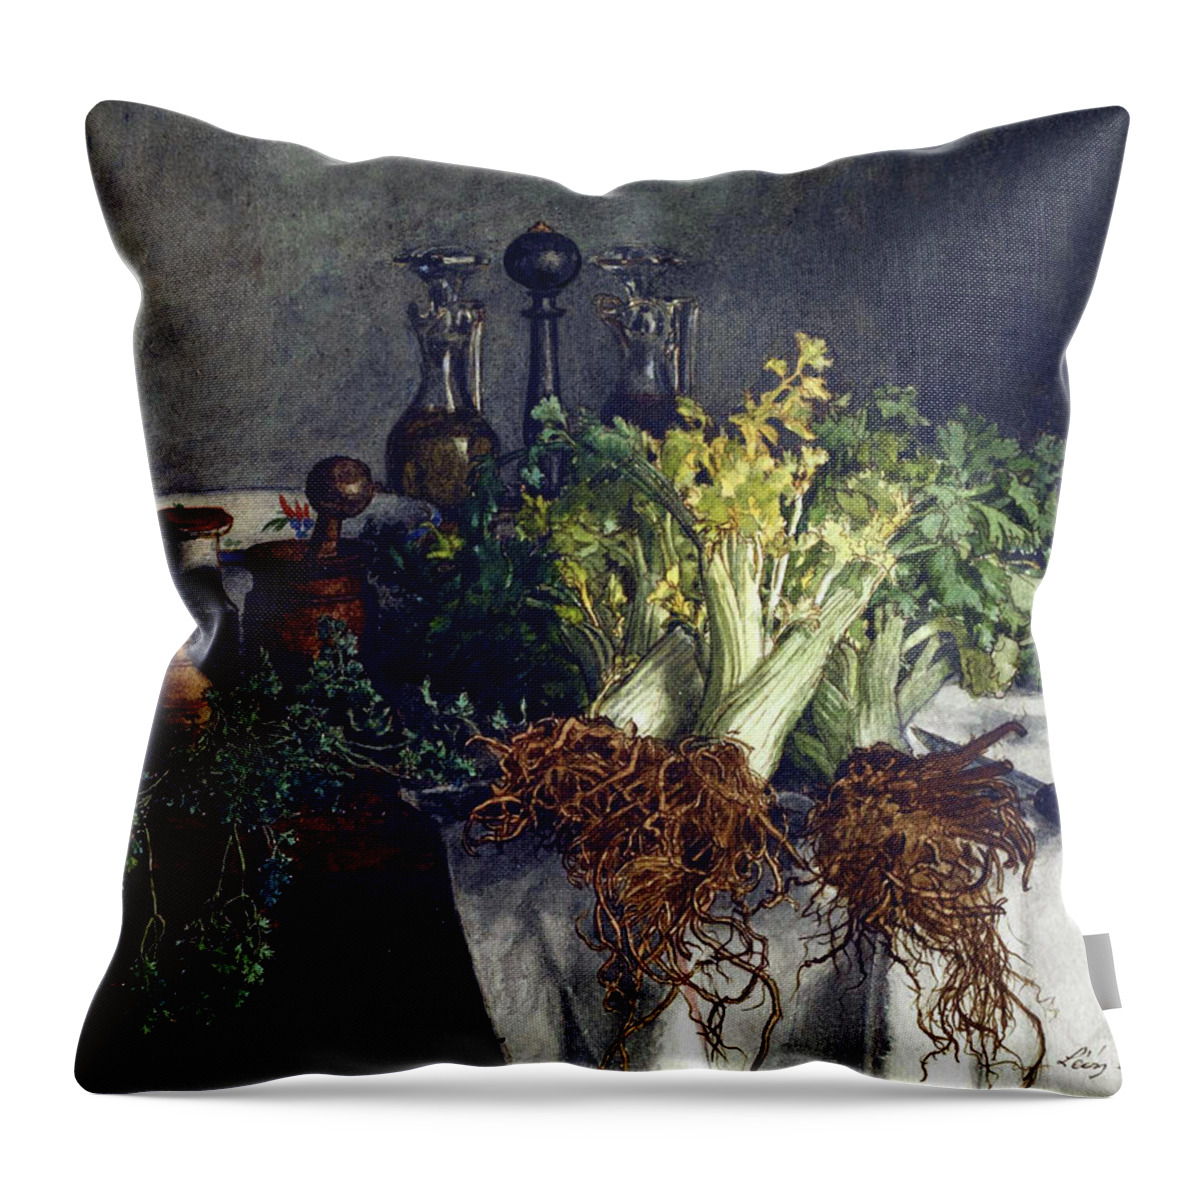  Still Life Throw Pillow featuring the painting Still Life on Kitchen by Long Shot